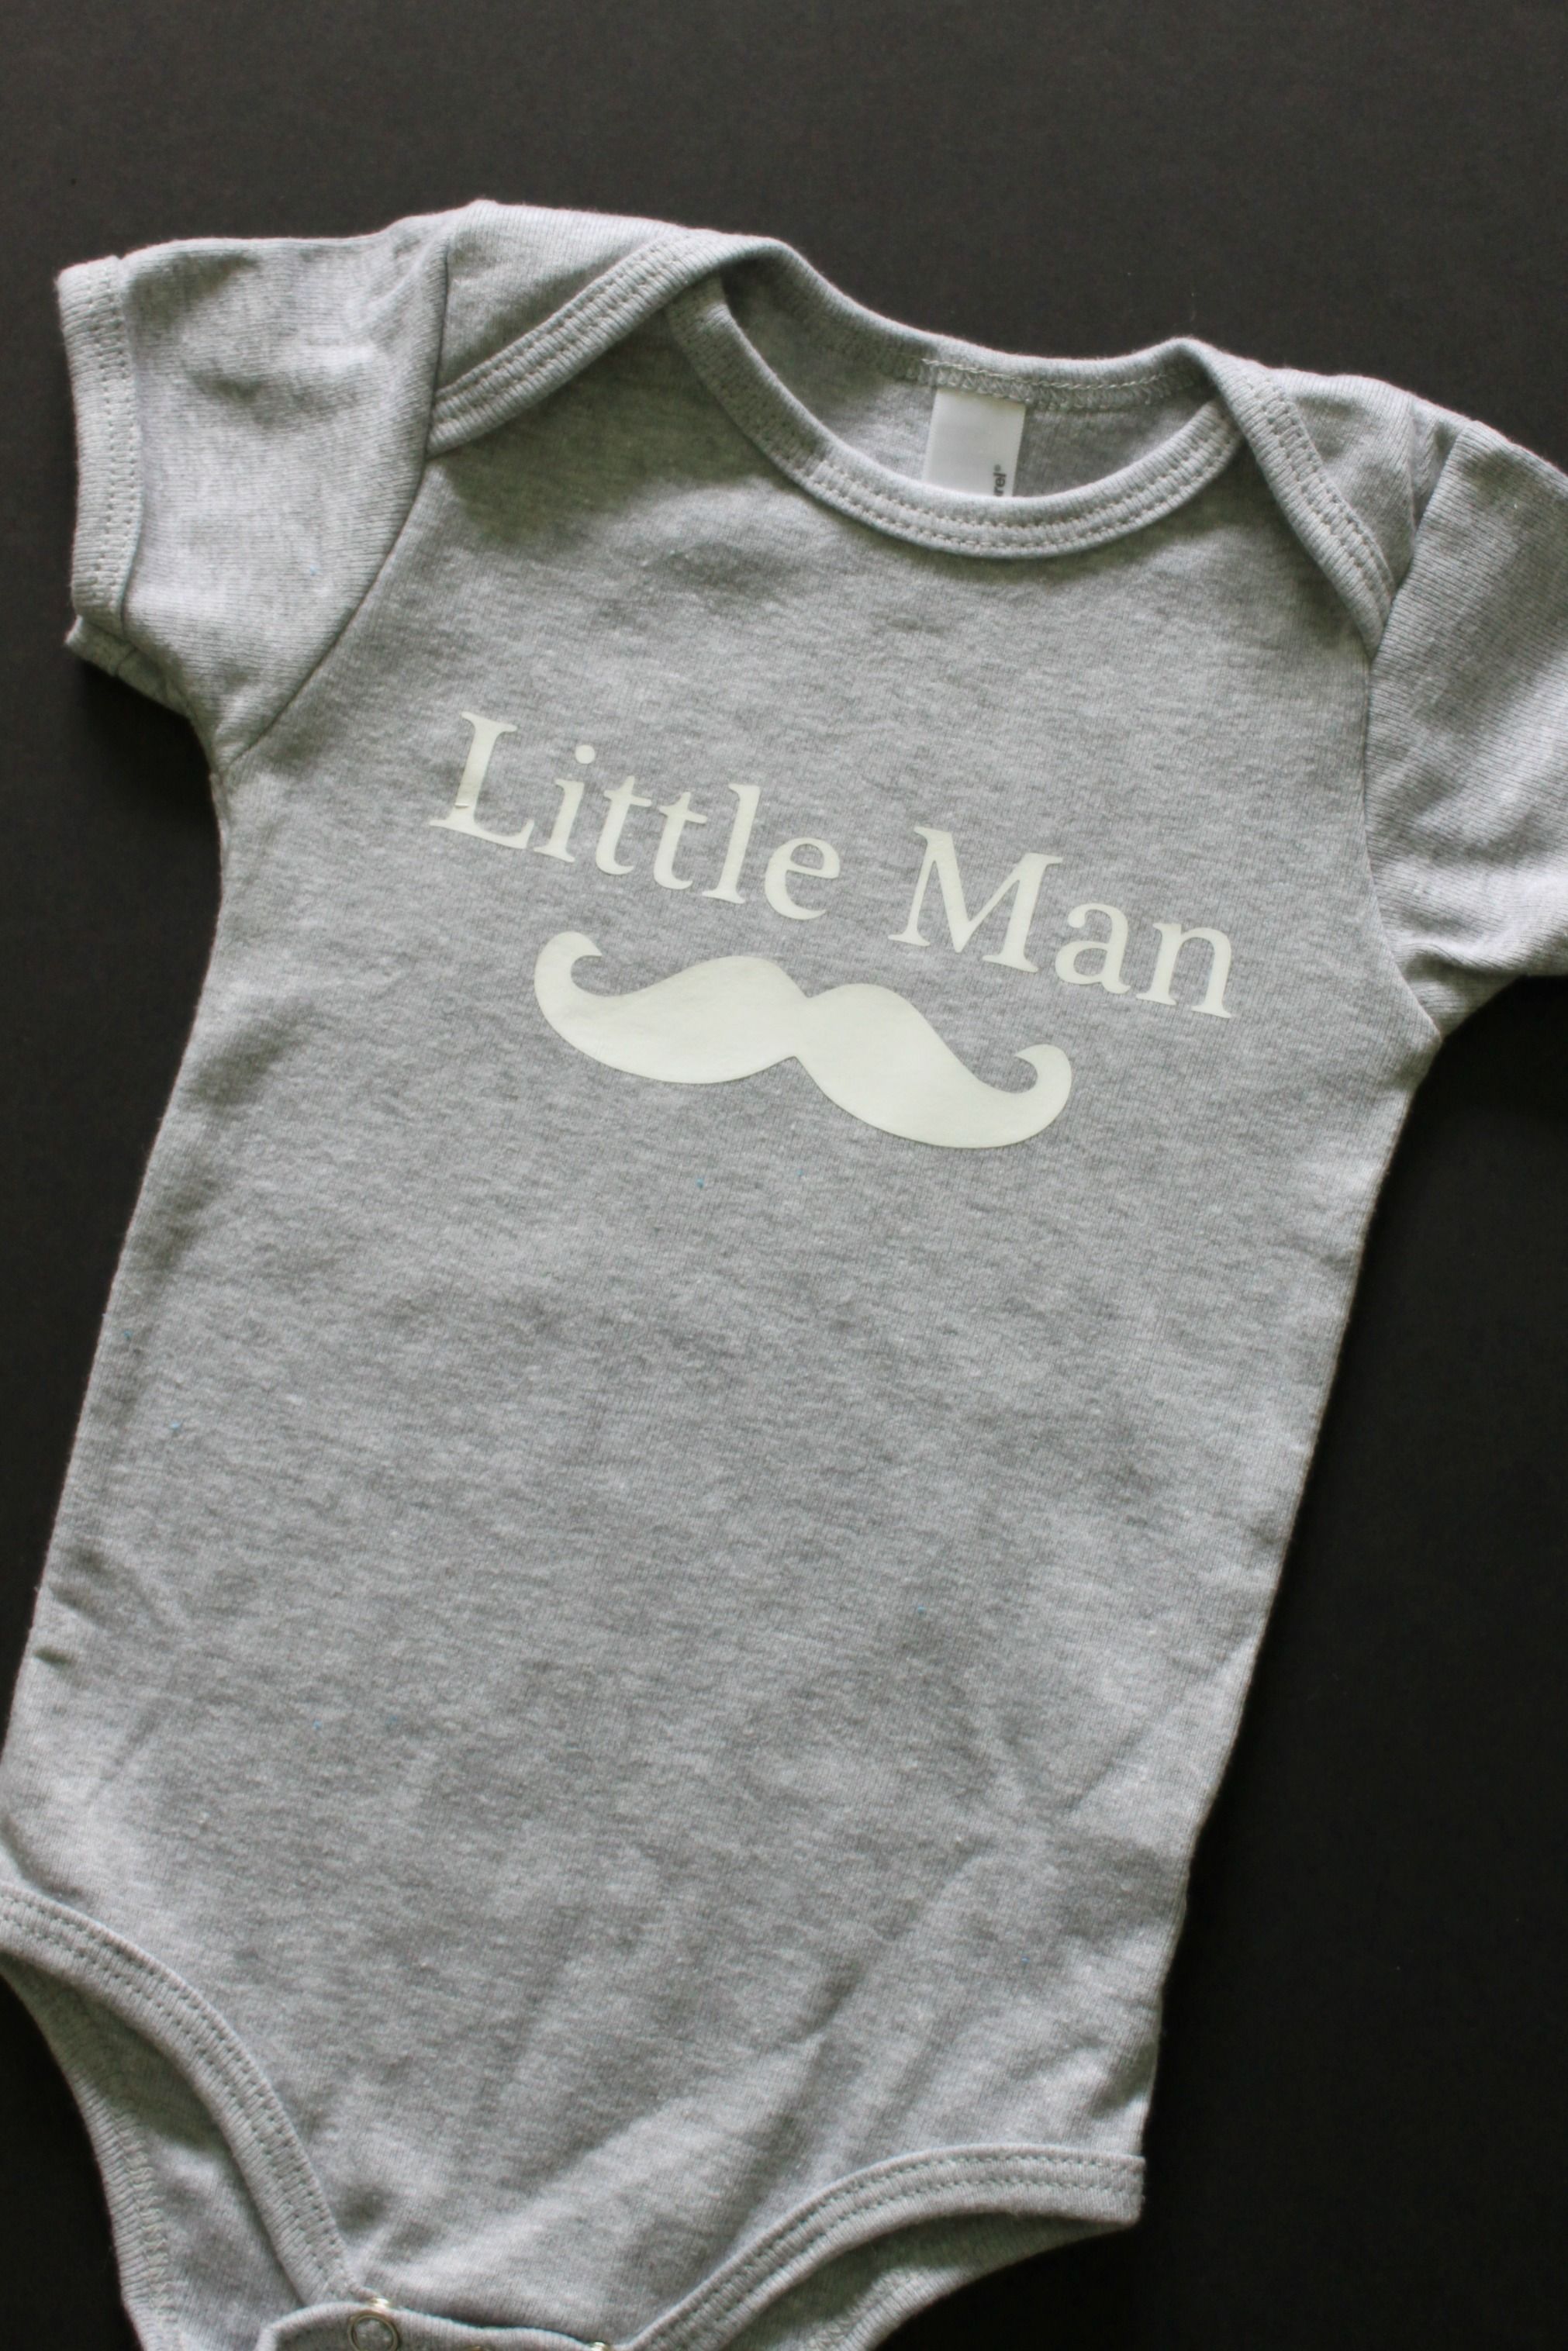 mustache onesie – reminds me of you, @Rachel  {Baked by Rachel} & what you c